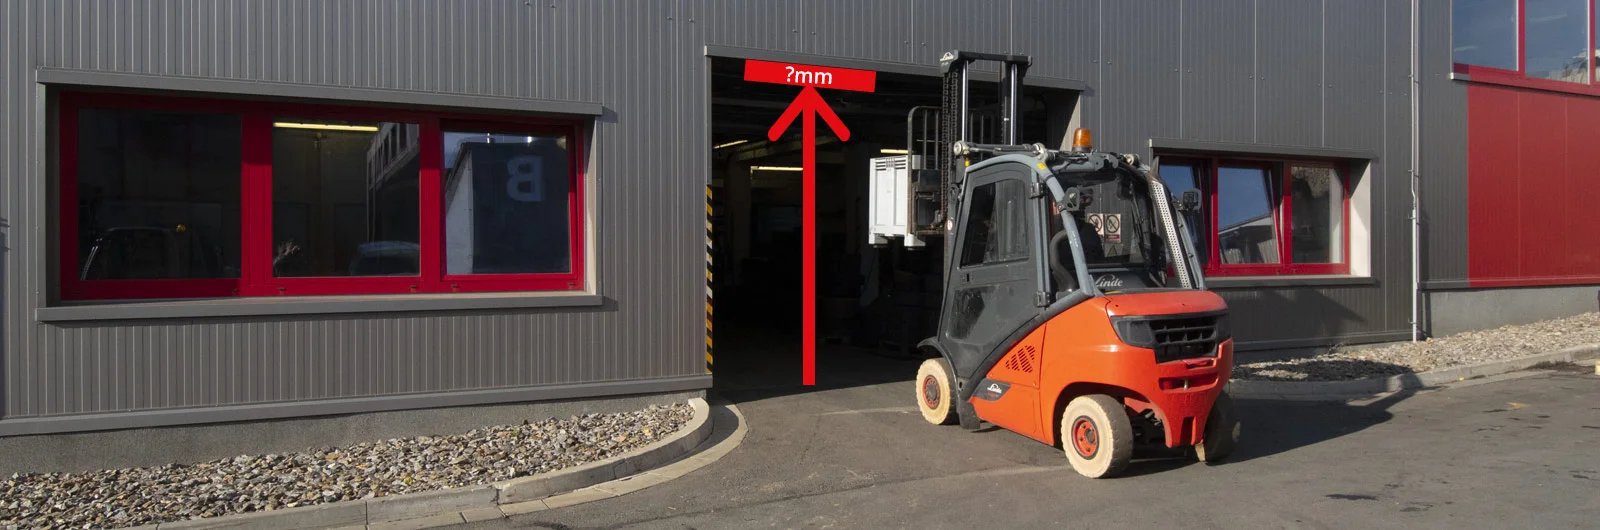 What is the maximum overall height of the forklift?